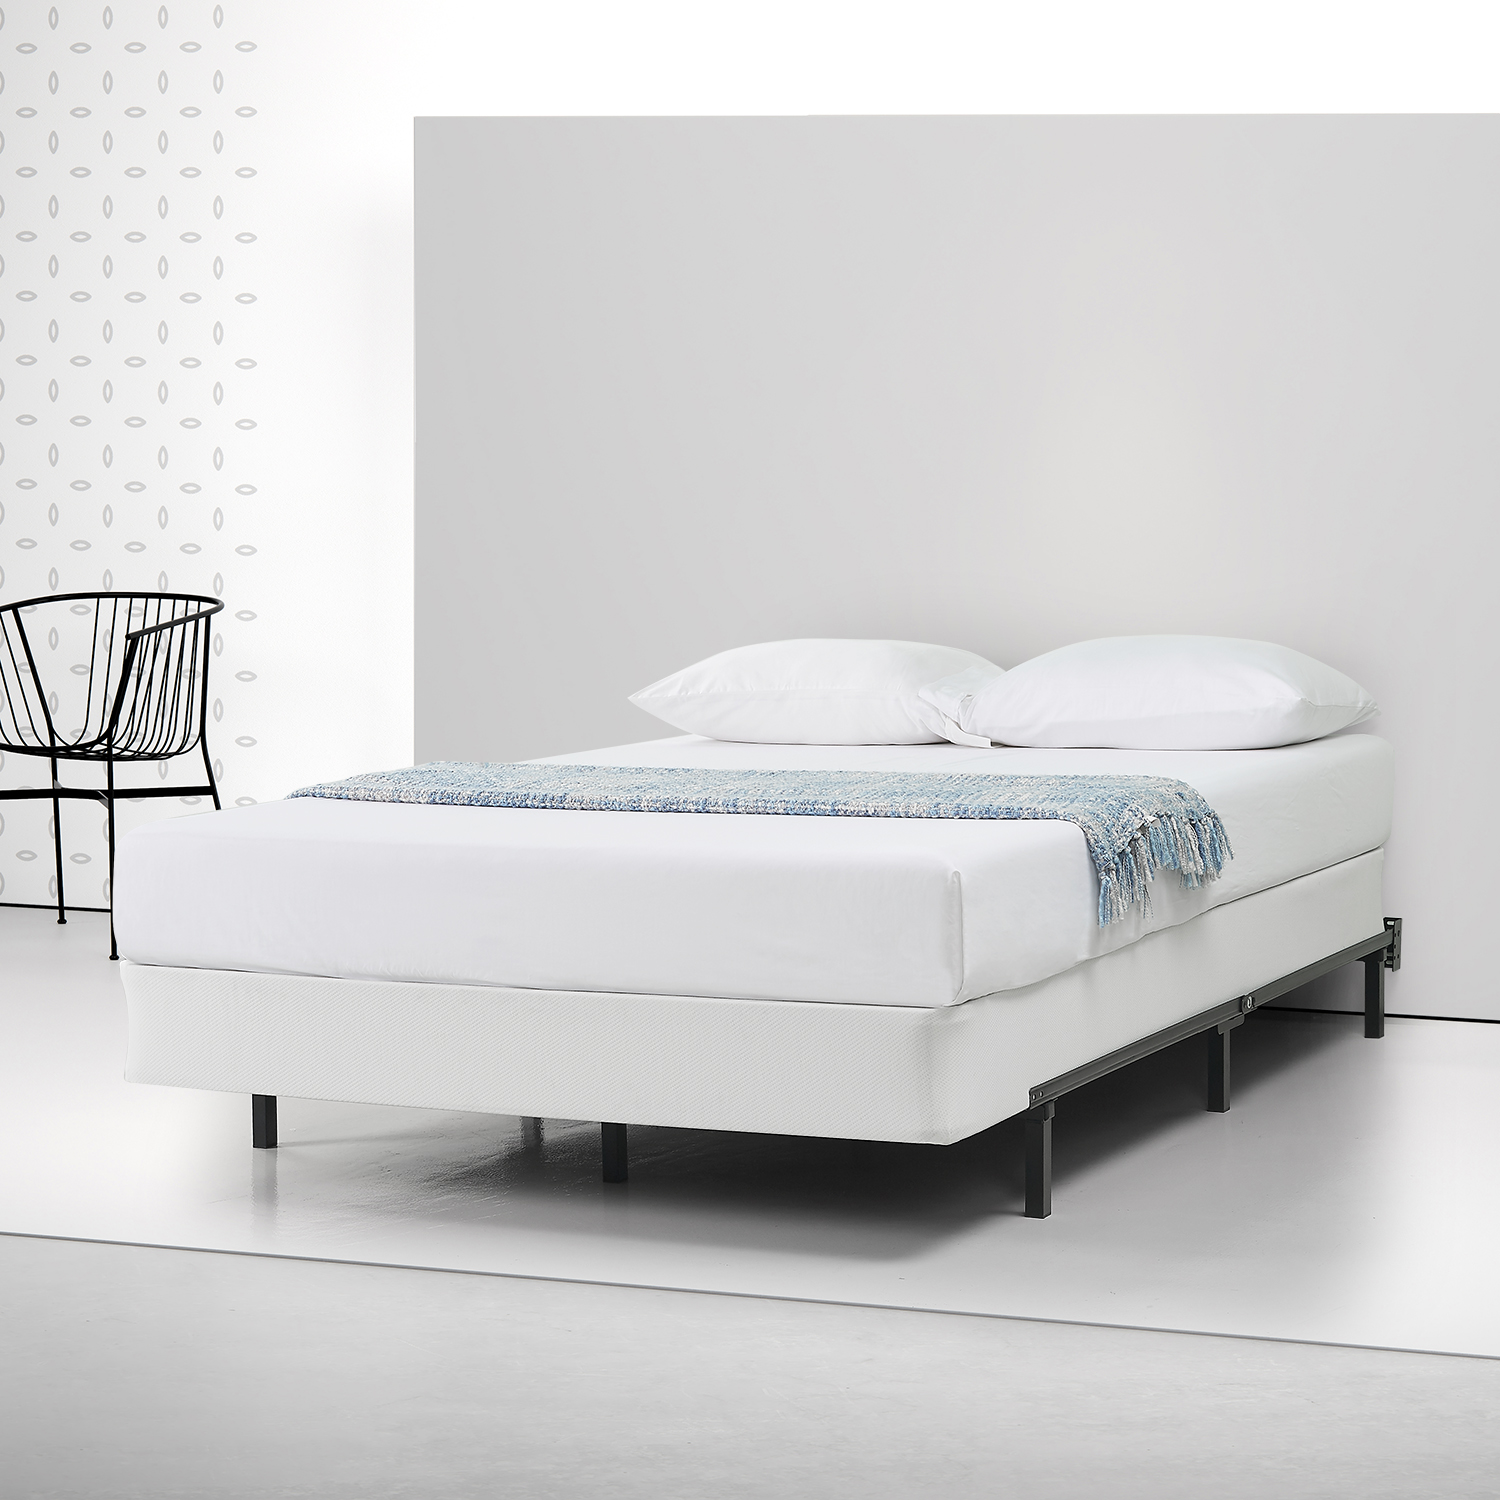 Spa Sensations by Zinus 7" Adjustable Bed Frame for Twin - Queen Sizes - image 2 of 8